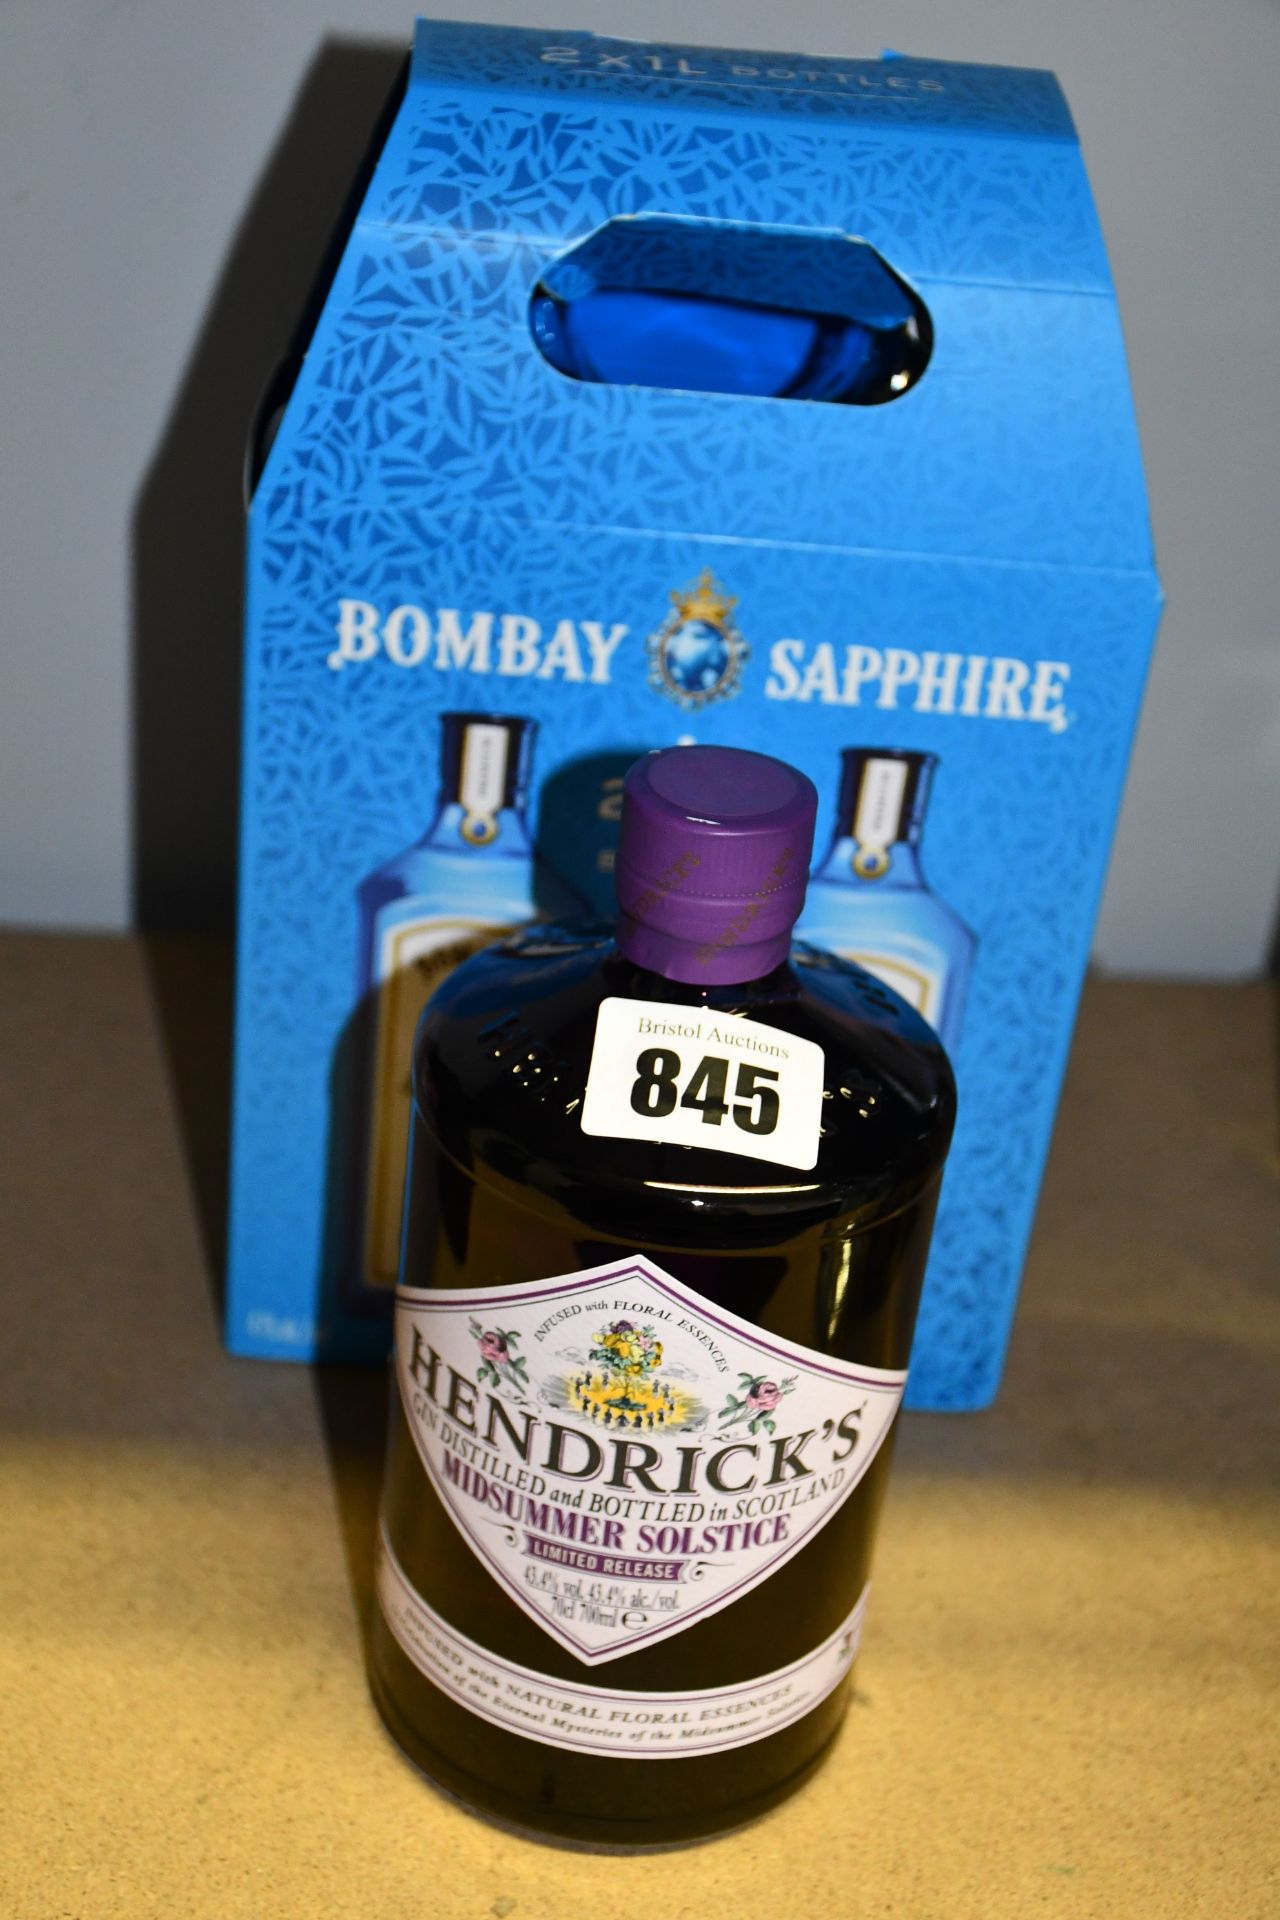 A Duo pack of Bombay Sapphire gin (2 x 1ltr) and Hendricks Midsummer Solstice (700ml) (Over 18s